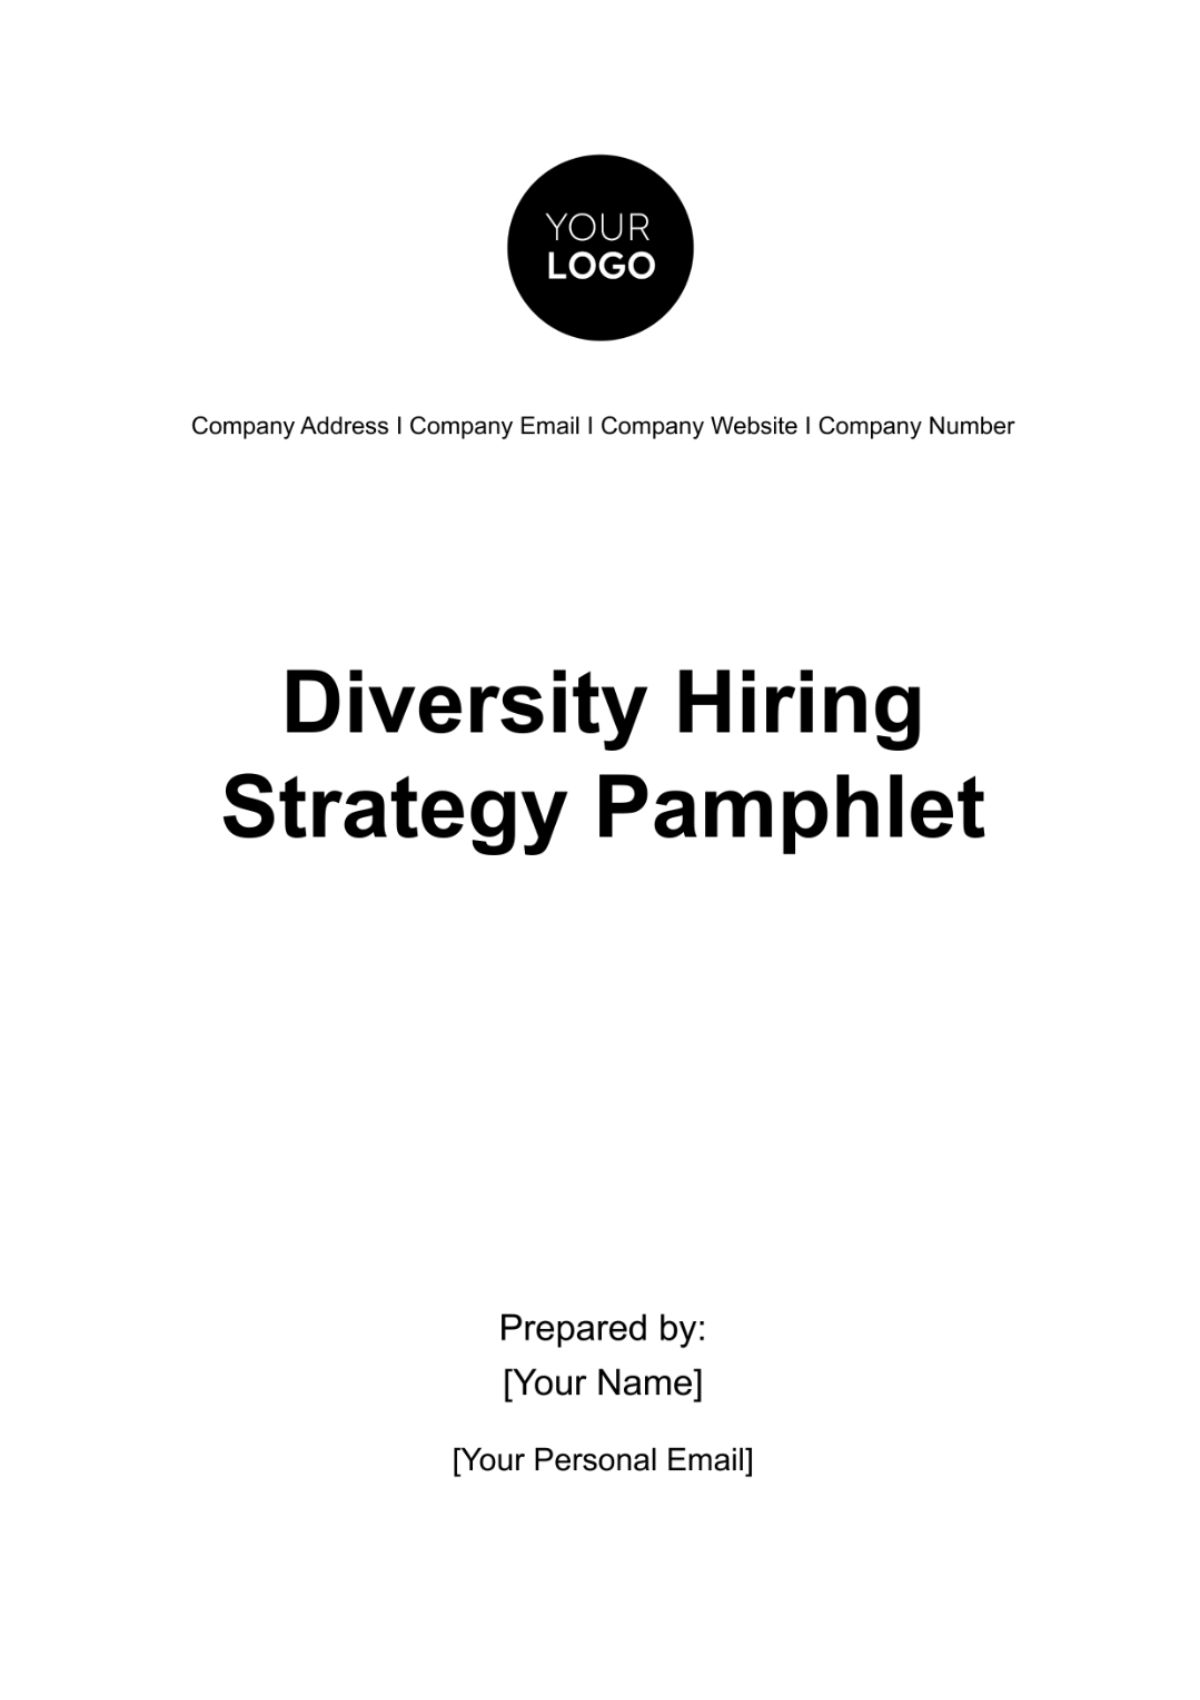 Diversity Hiring Strategy Pamphlet HR Template